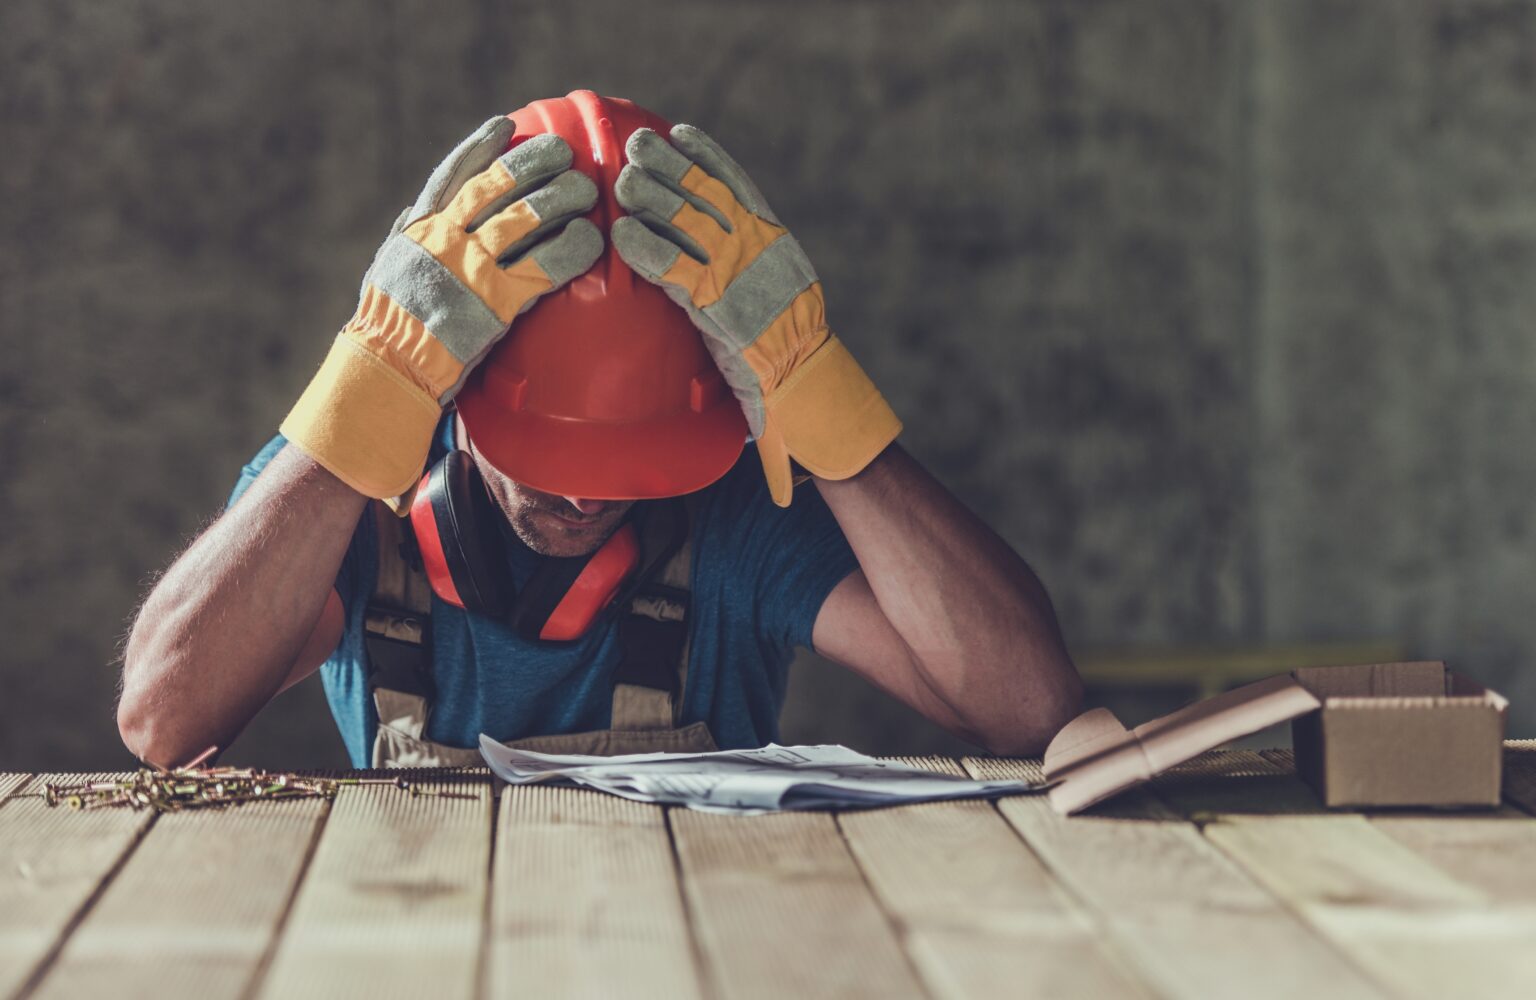 Legal Advice for Roofers: What to do if you get stiffed